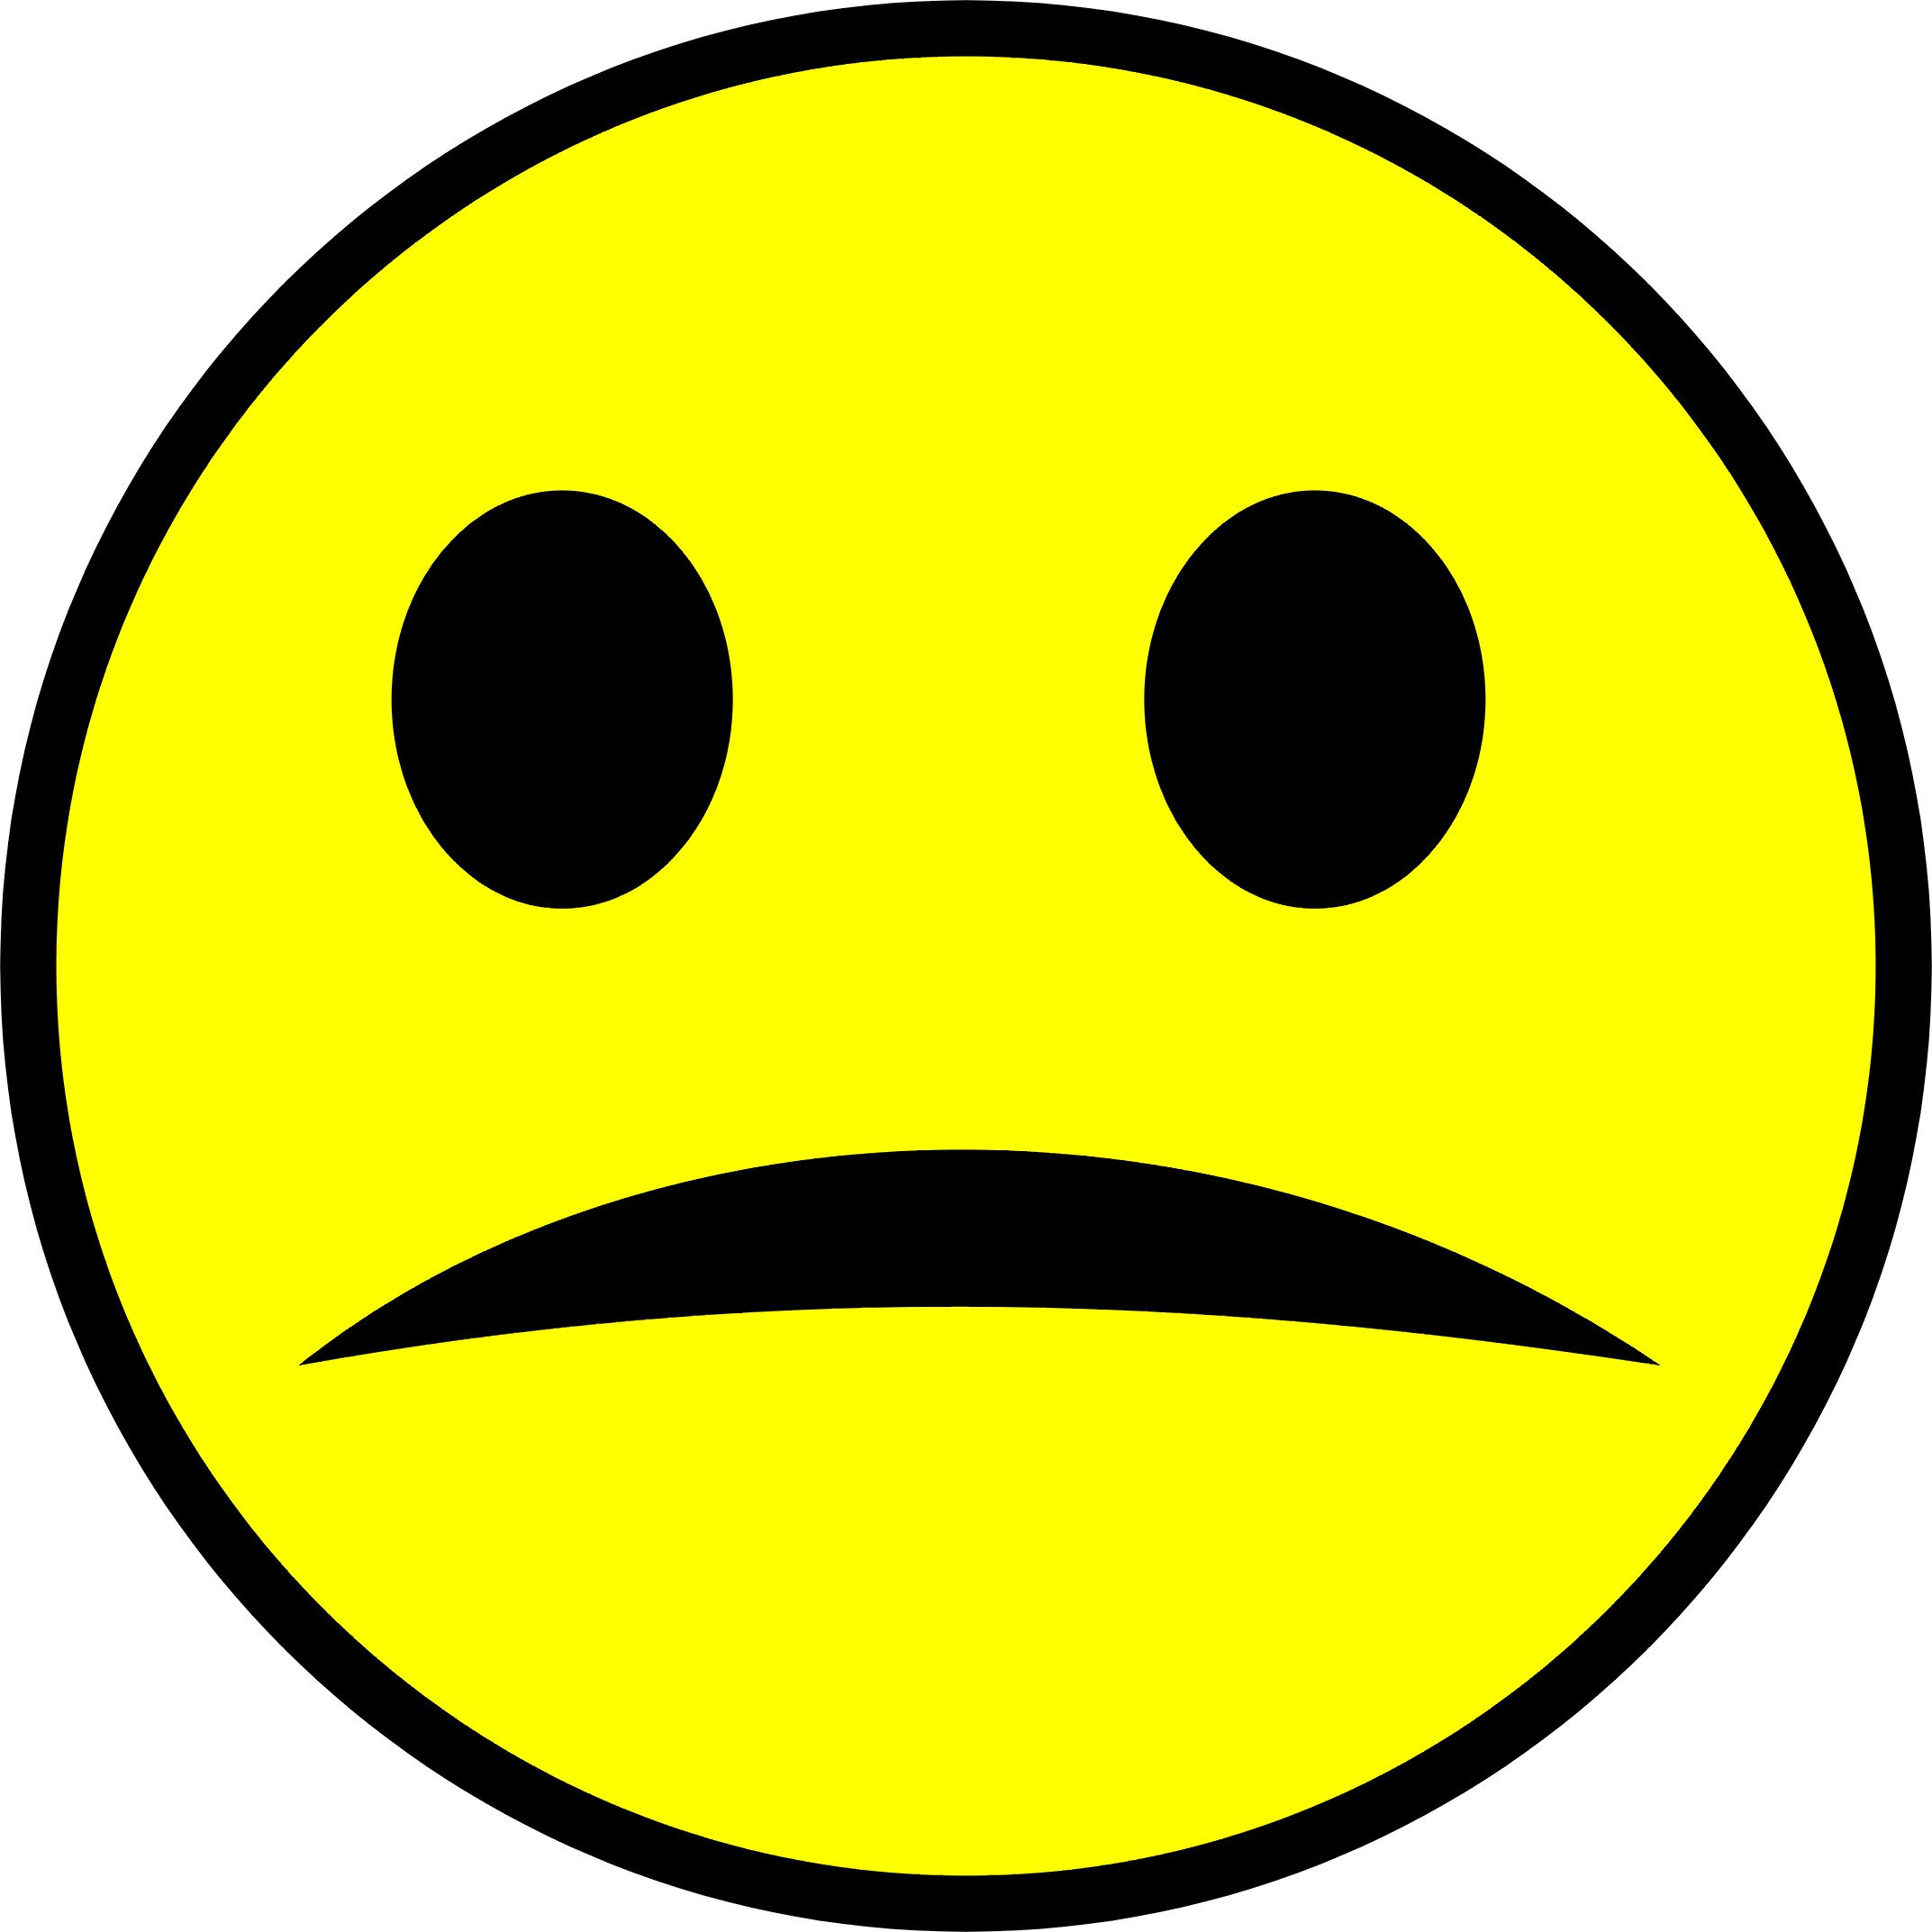 Sad smiley face clipart » Clipart Station.